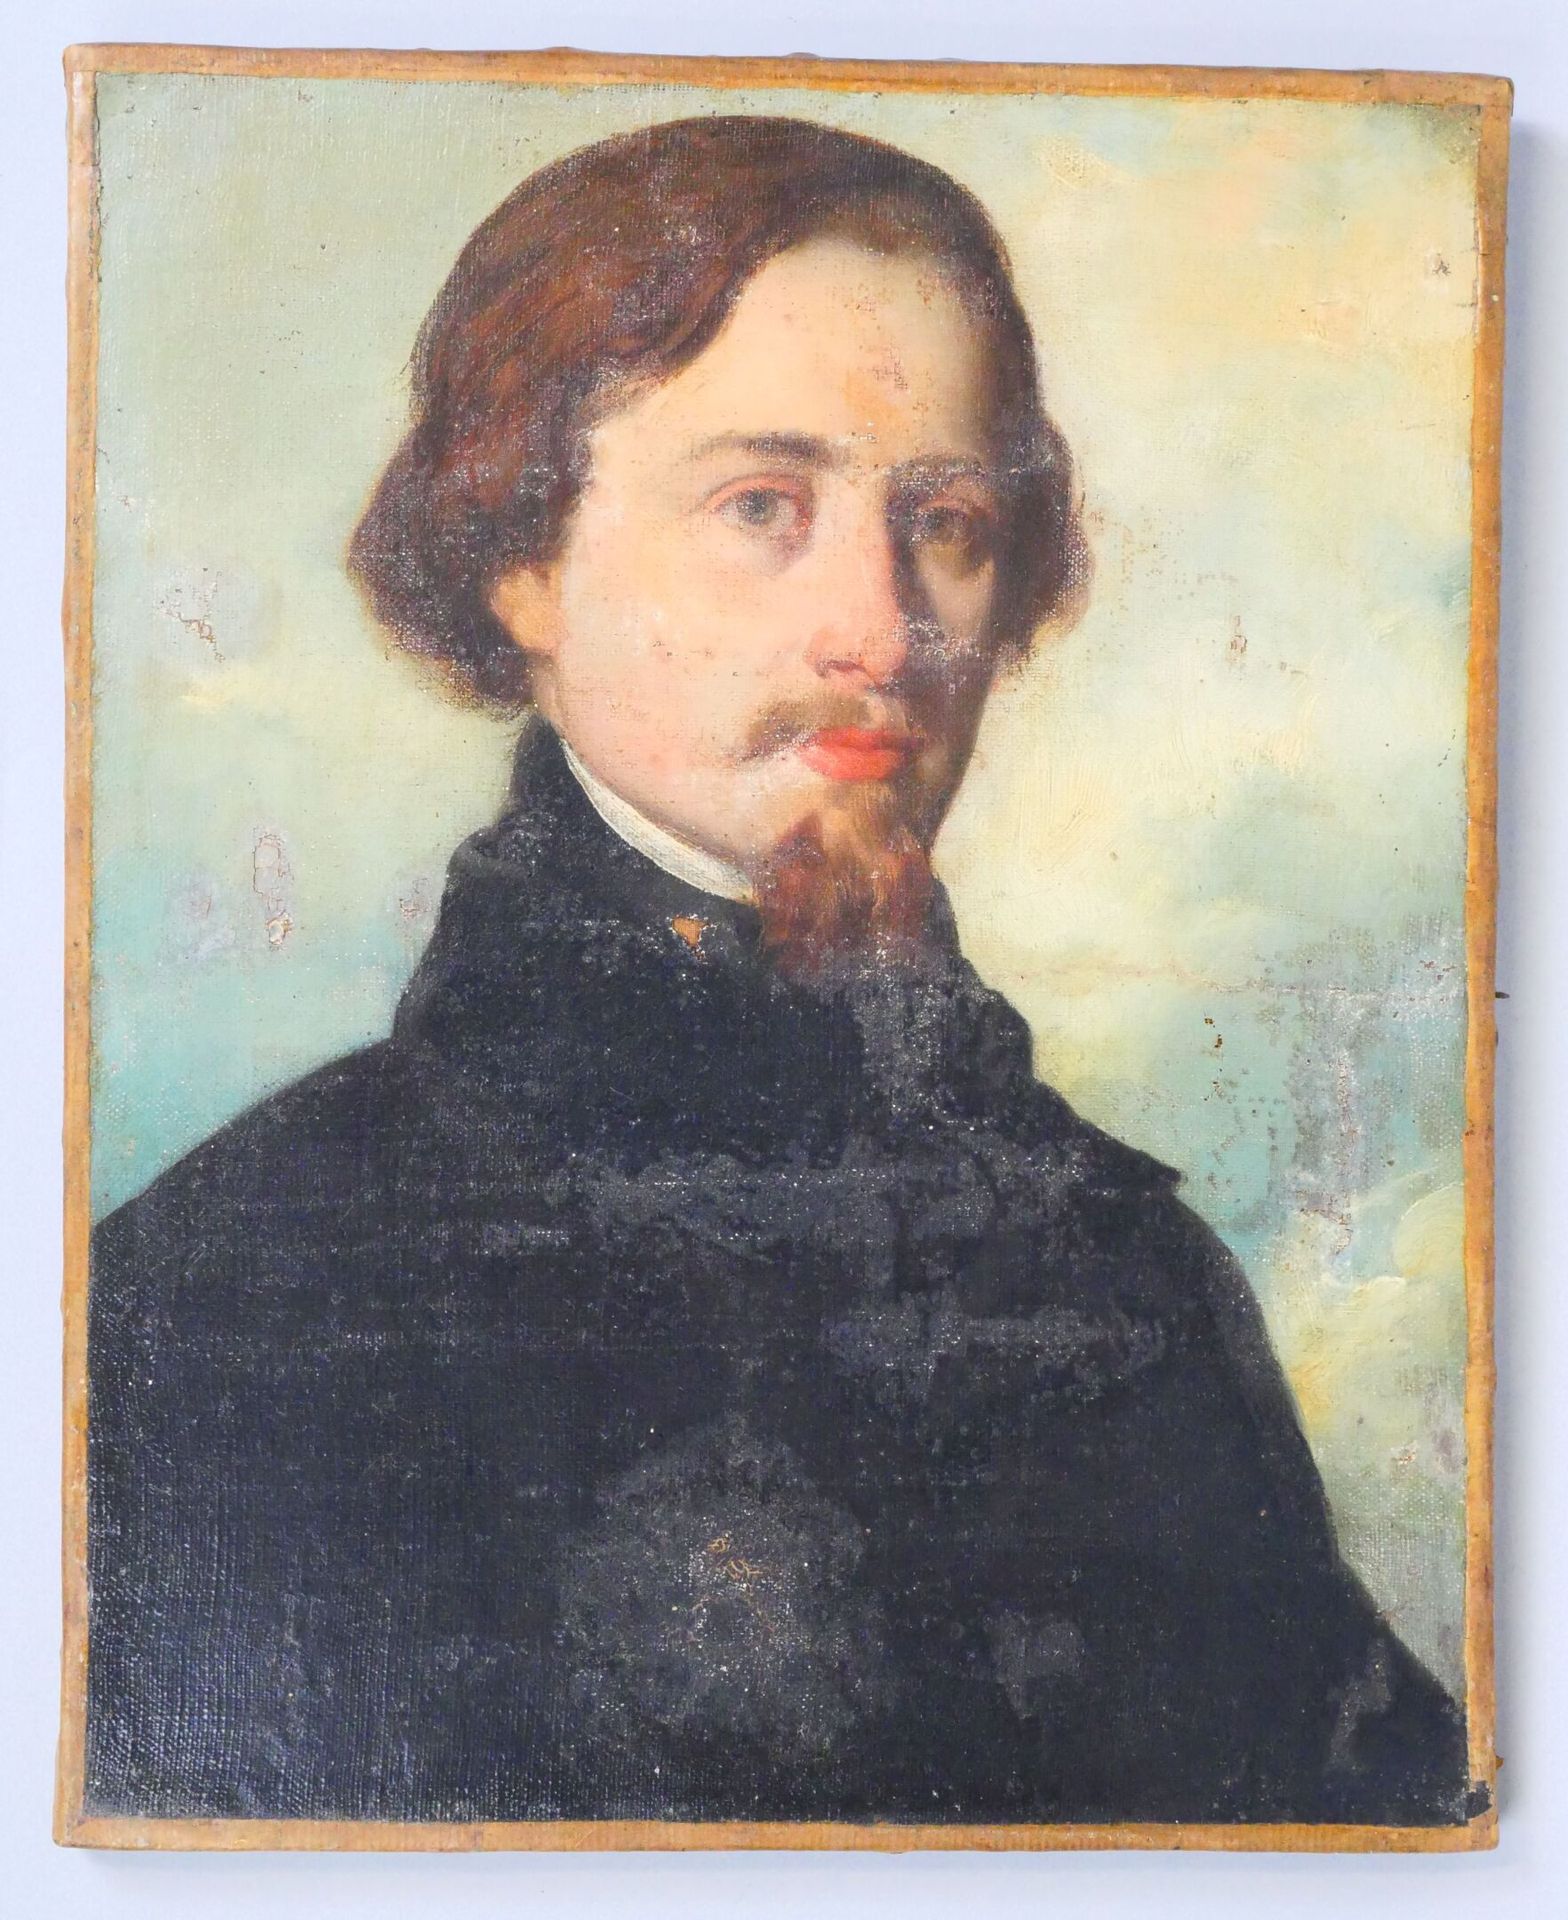 Null School of the 19th century
Portrait of a bourgeois man
Oil on canvas, with &hellip;